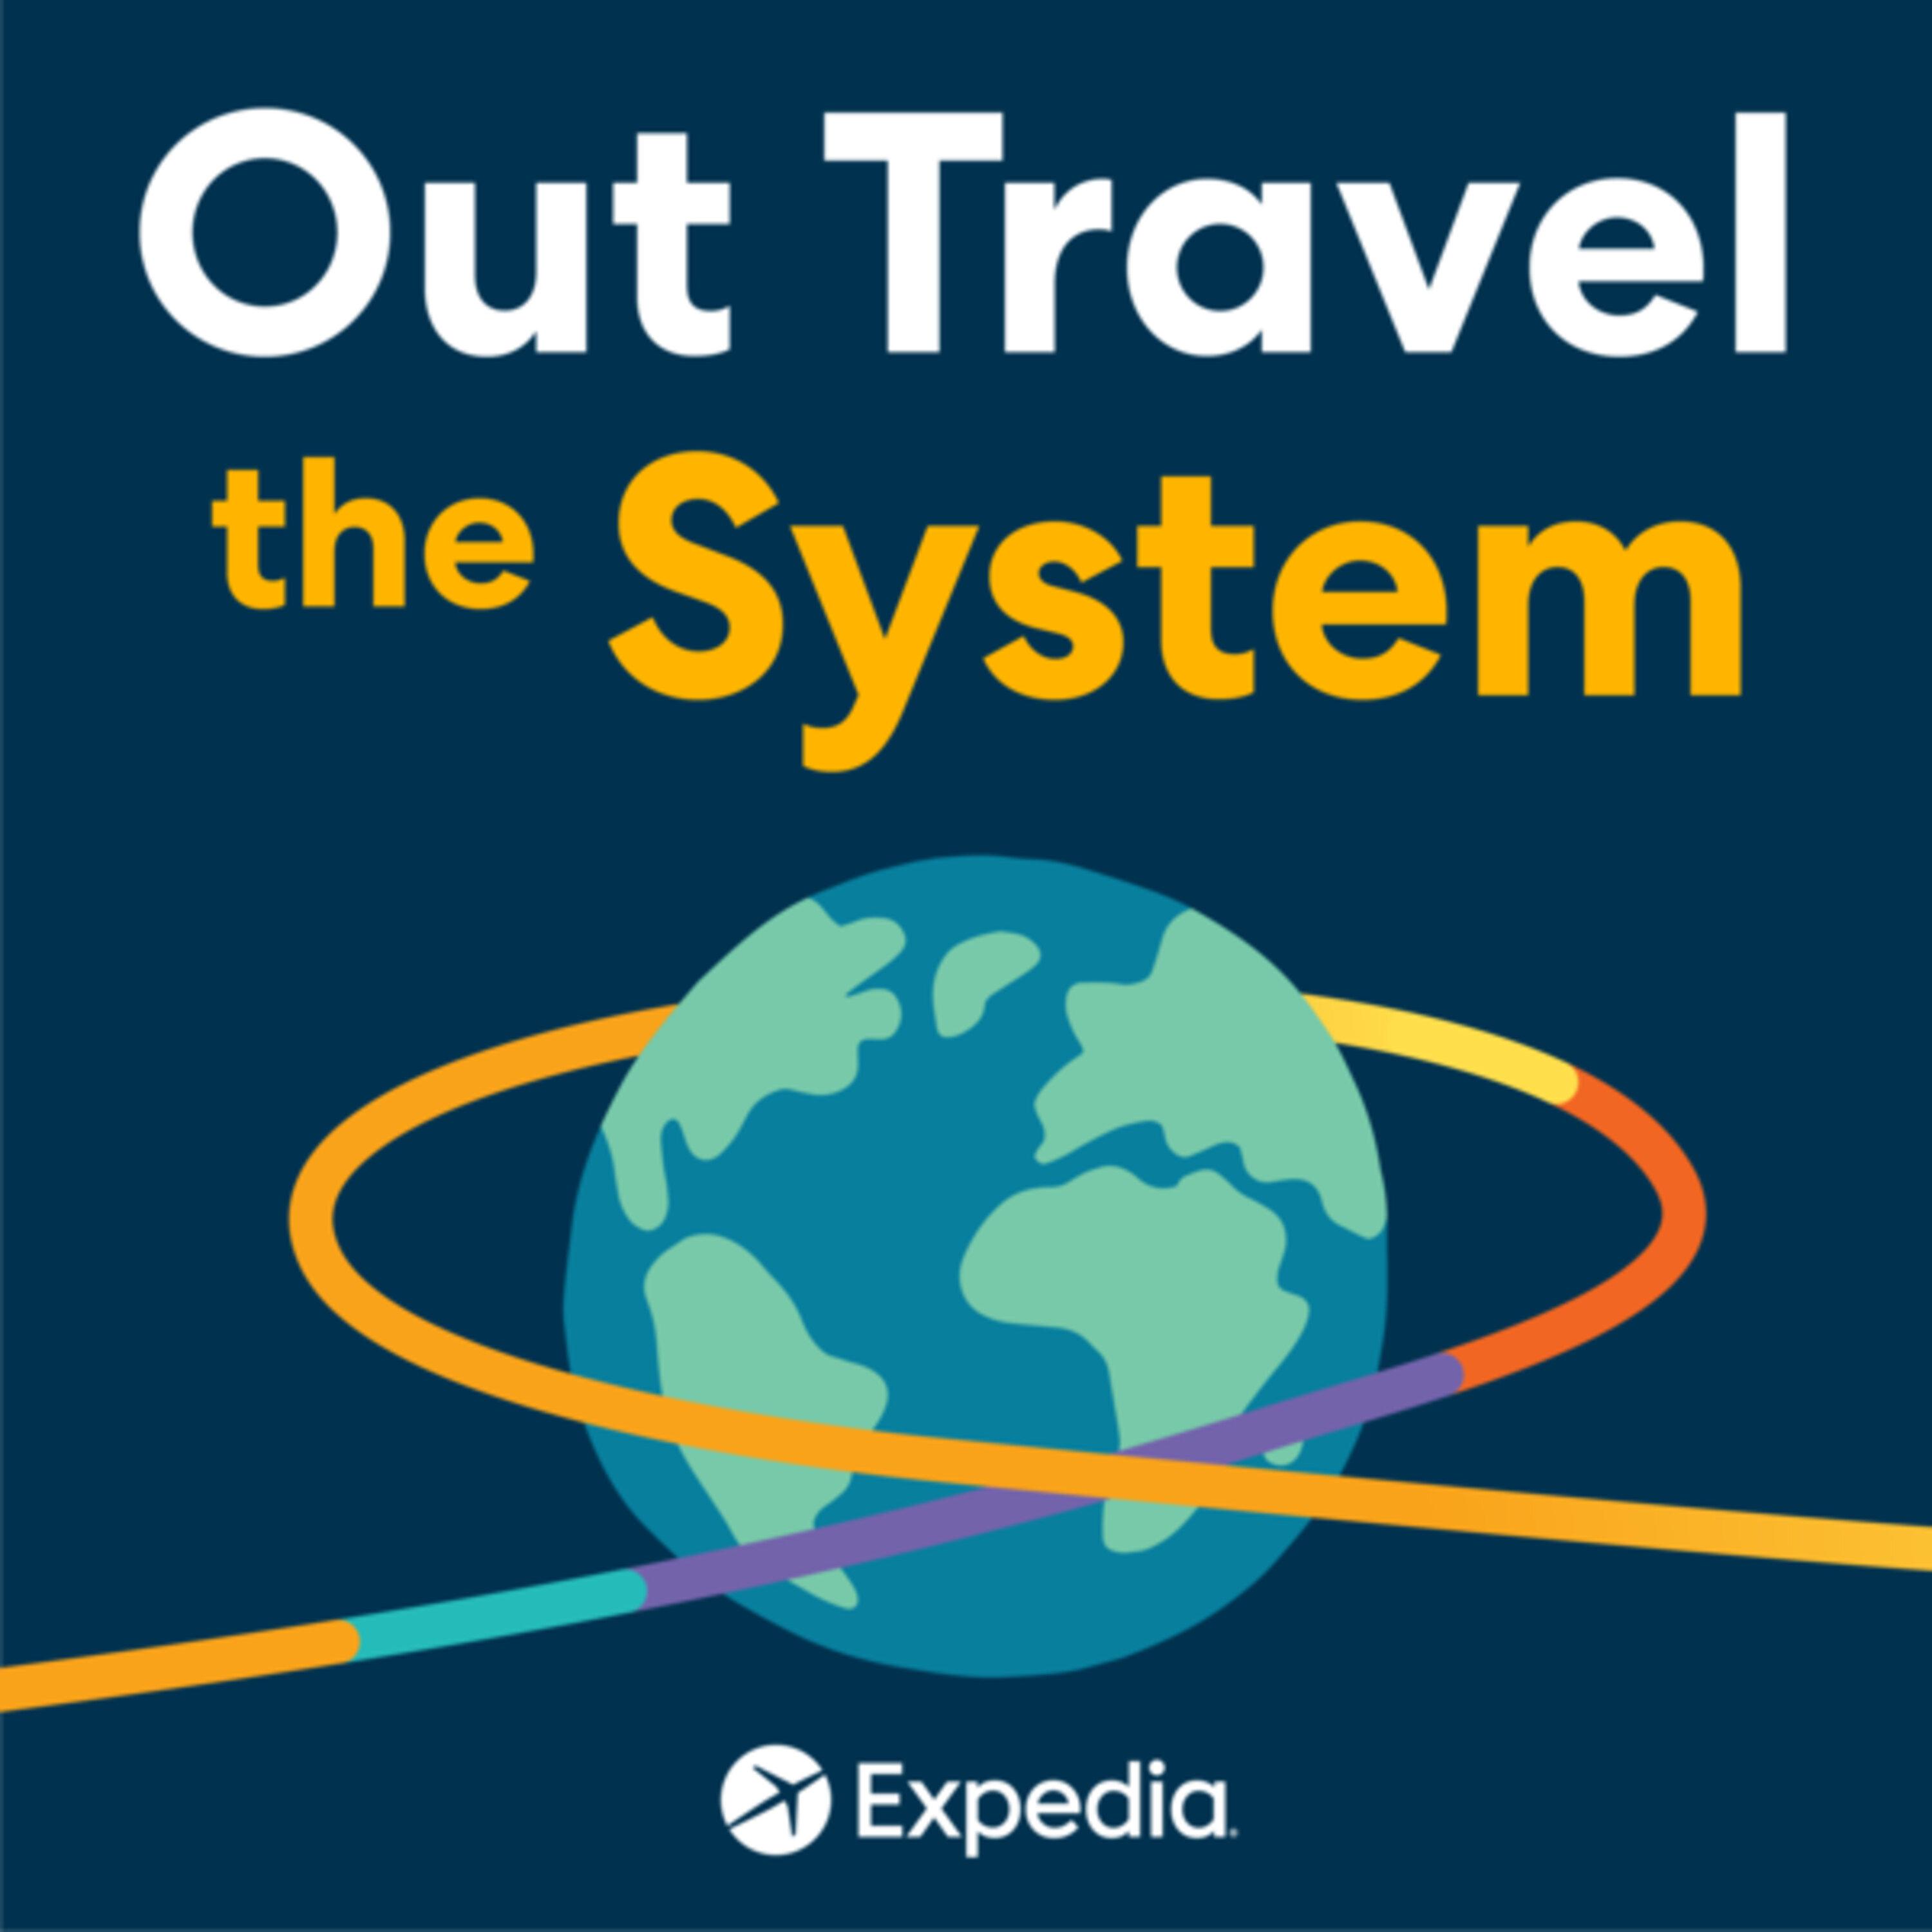 Thumbnail for "Out Travel the System - Show Promo".